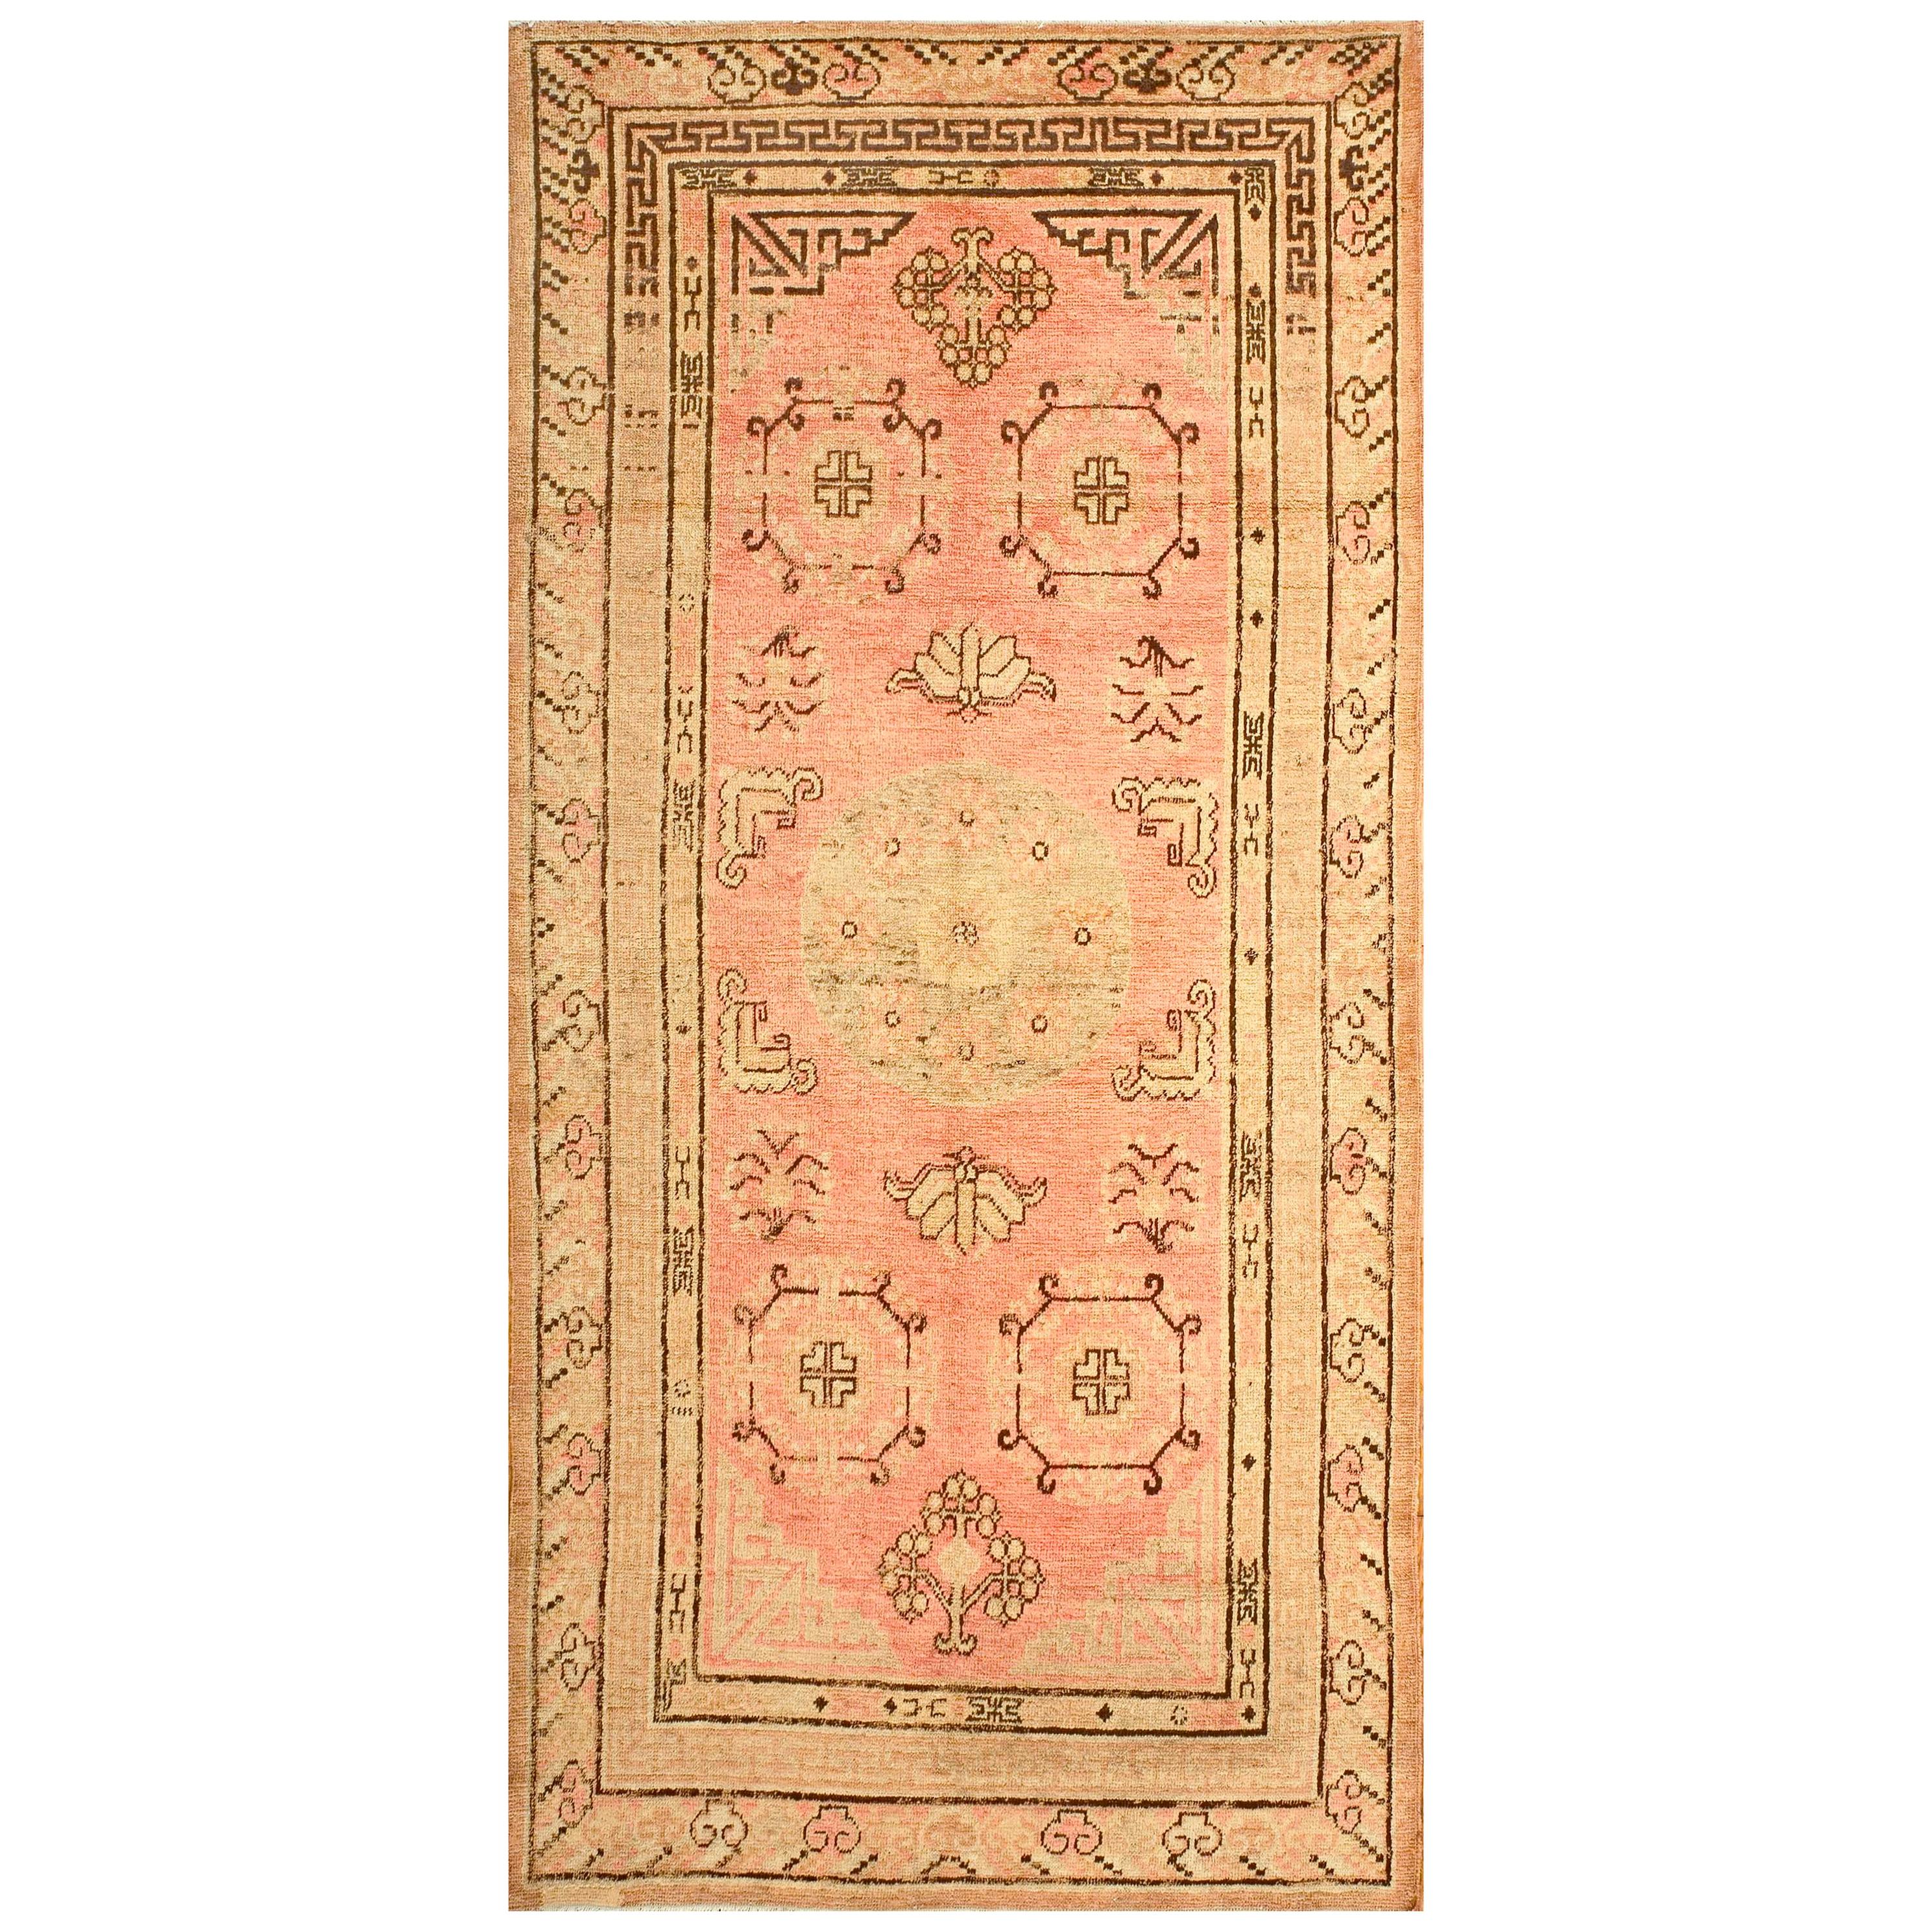 Early 20th Century Central Asian Khotan Rug ( 4' x 8' - 122 x 245 ) For Sale